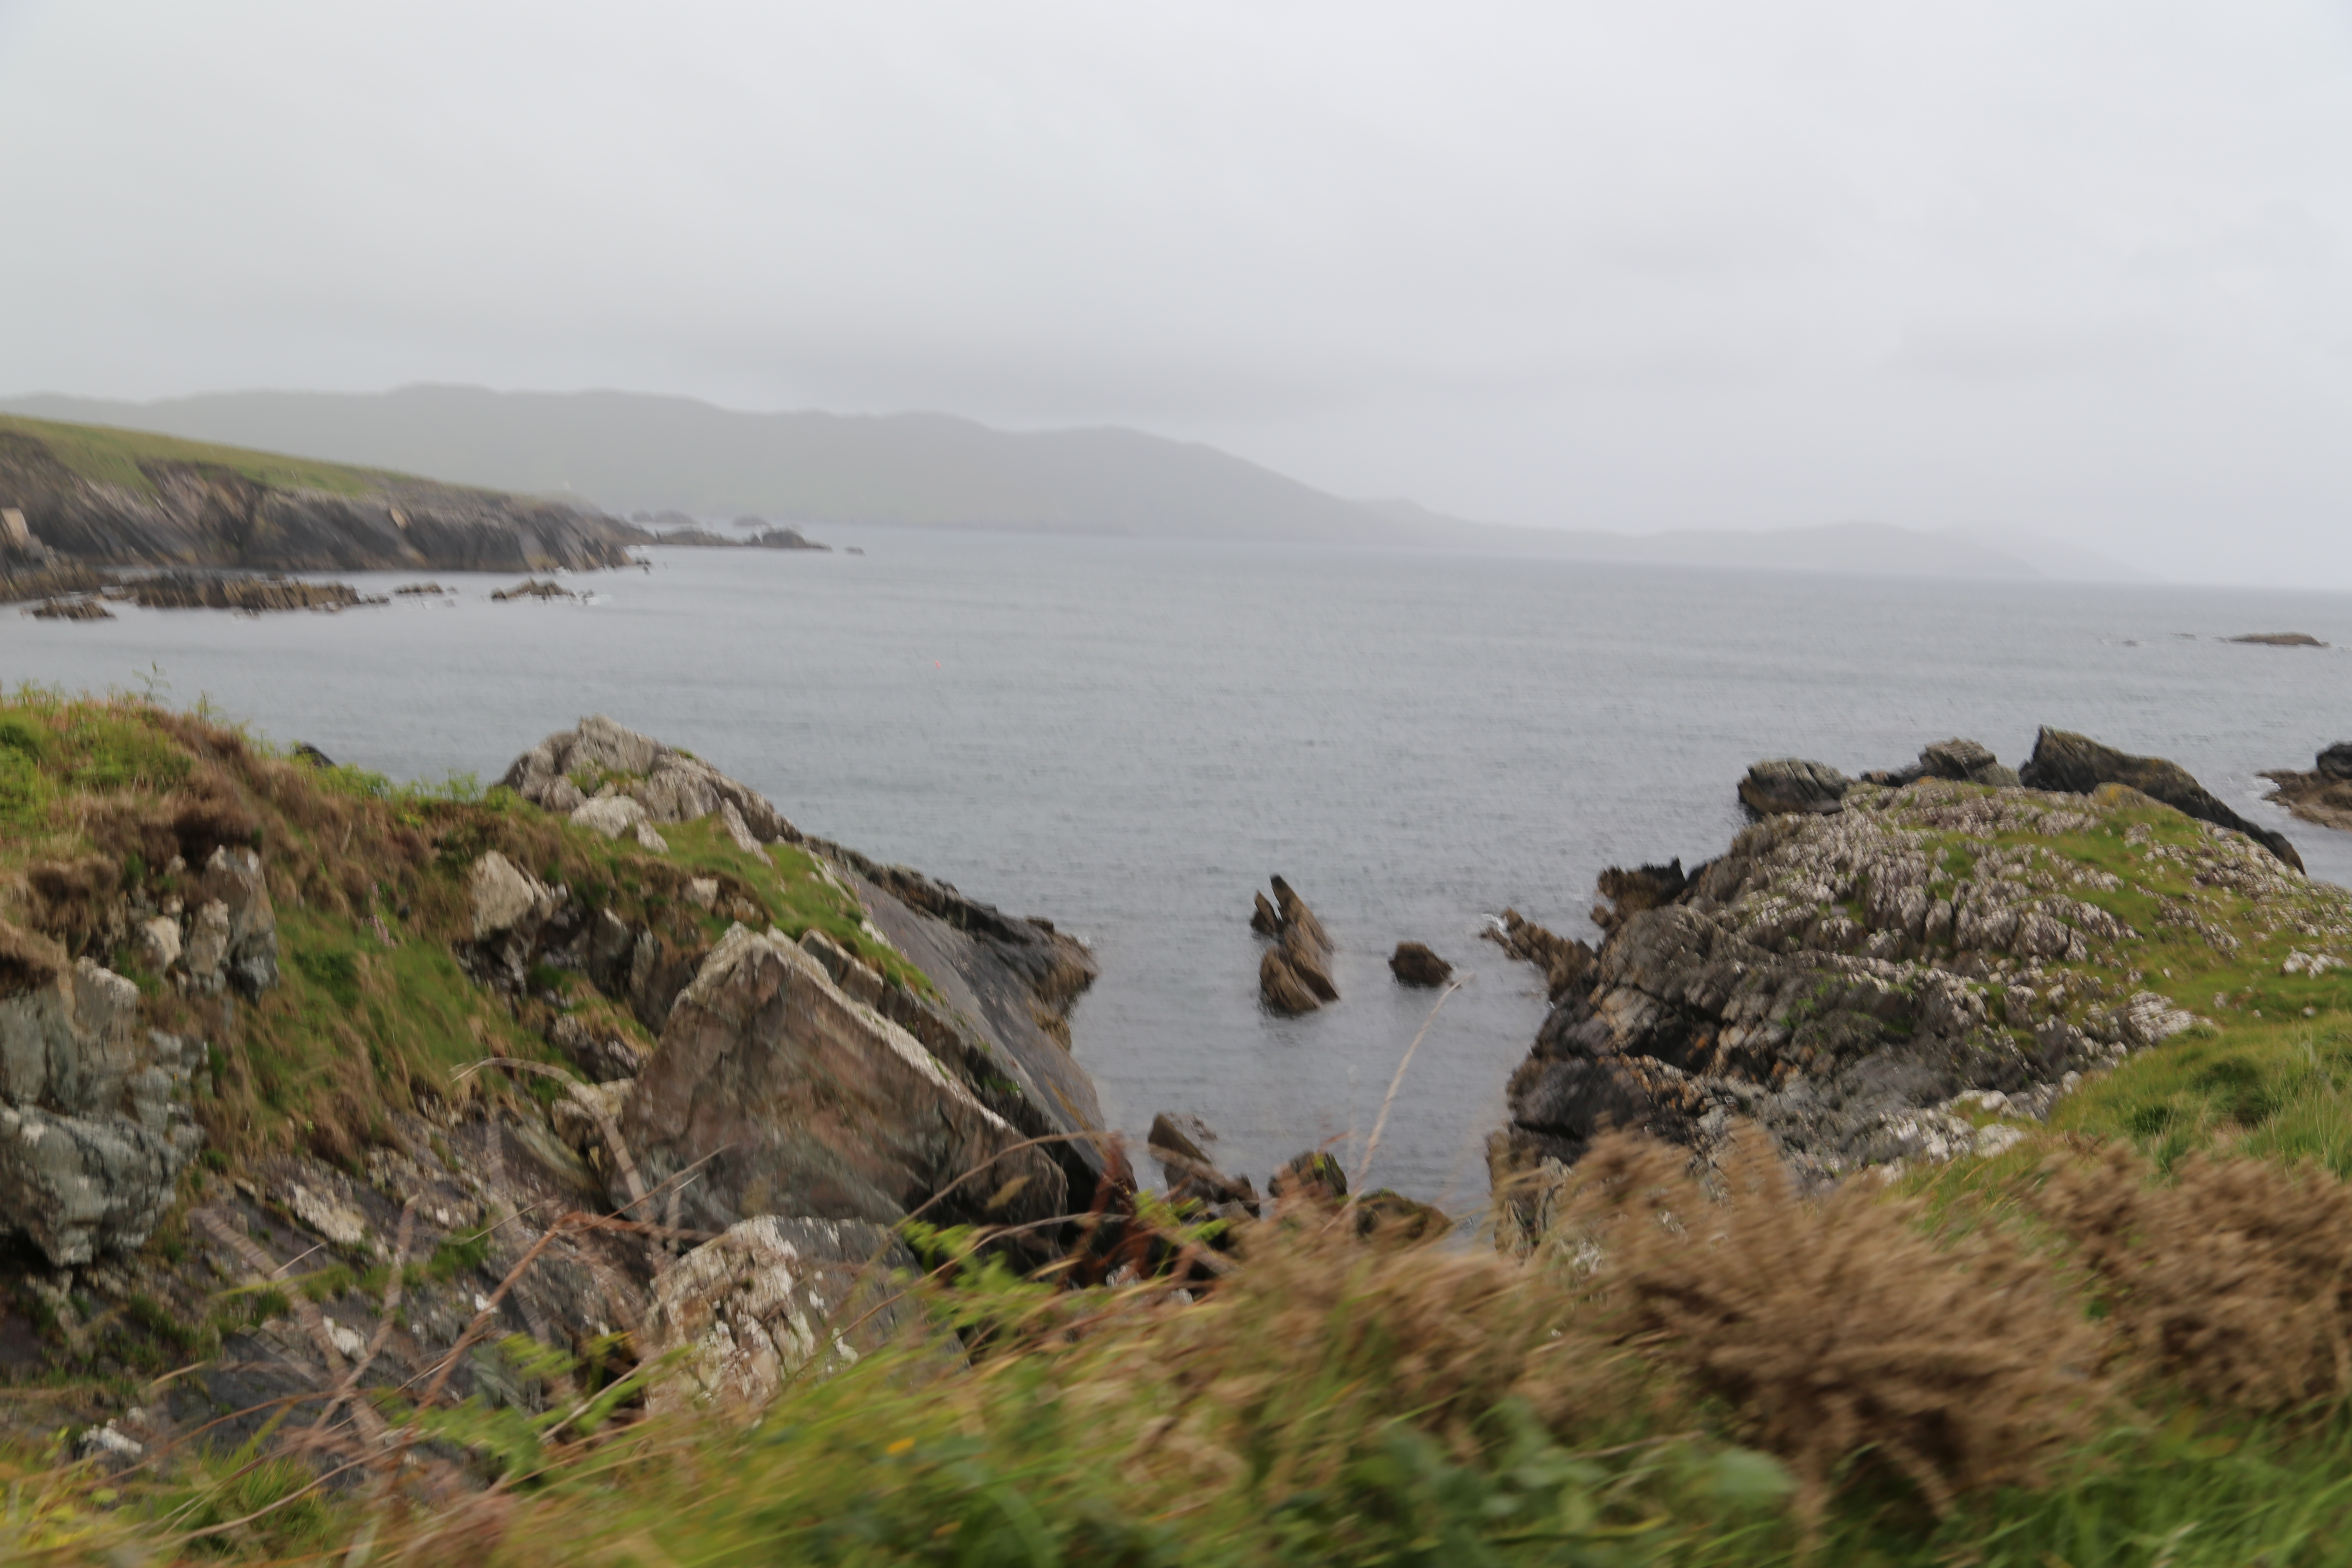 2014 Europe Trip Day 4 - Ireland (Beara Peninsula, Healy Pass, Castletown-Bearhaven, Dursey Island Cable Car, Allihies, Eyeries, Chips and Curry)